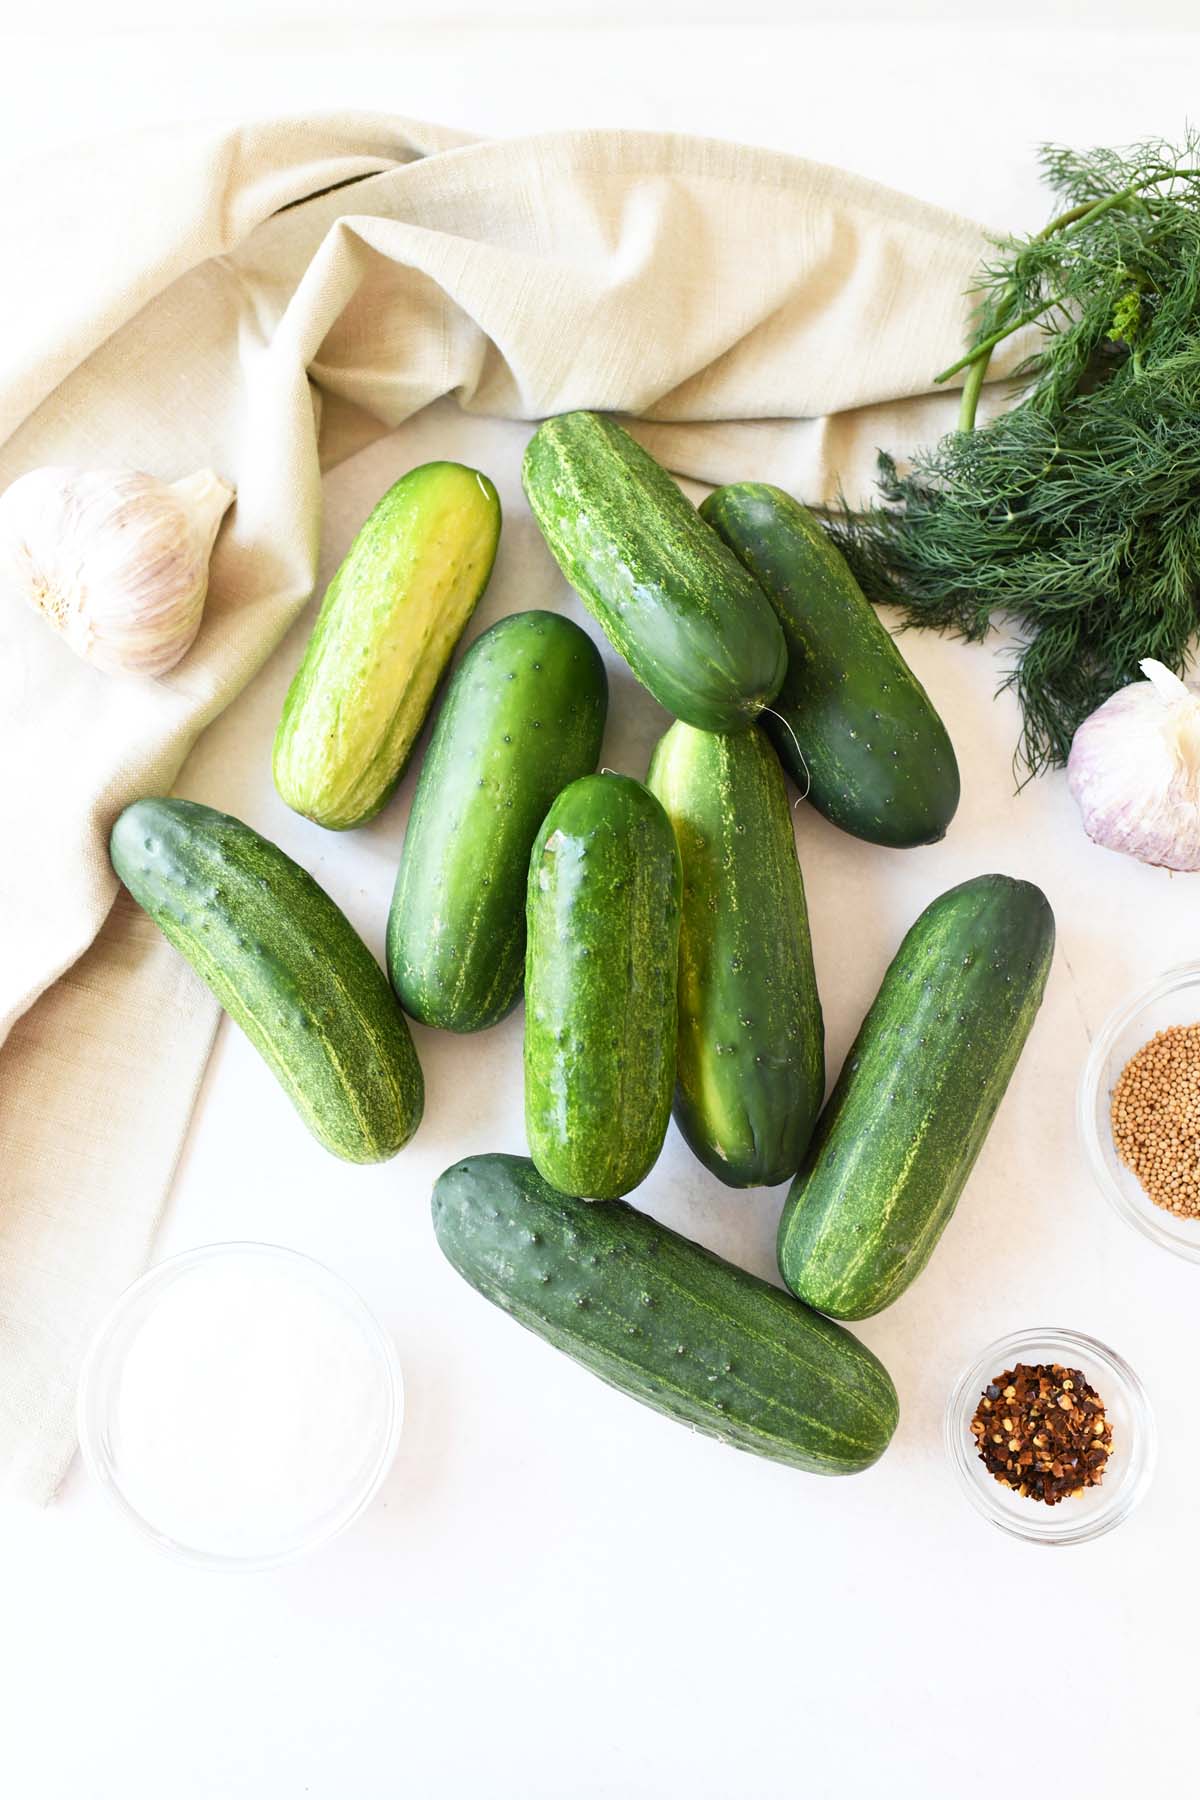 Pickling cucumbers and spices on a white table with a napkin.